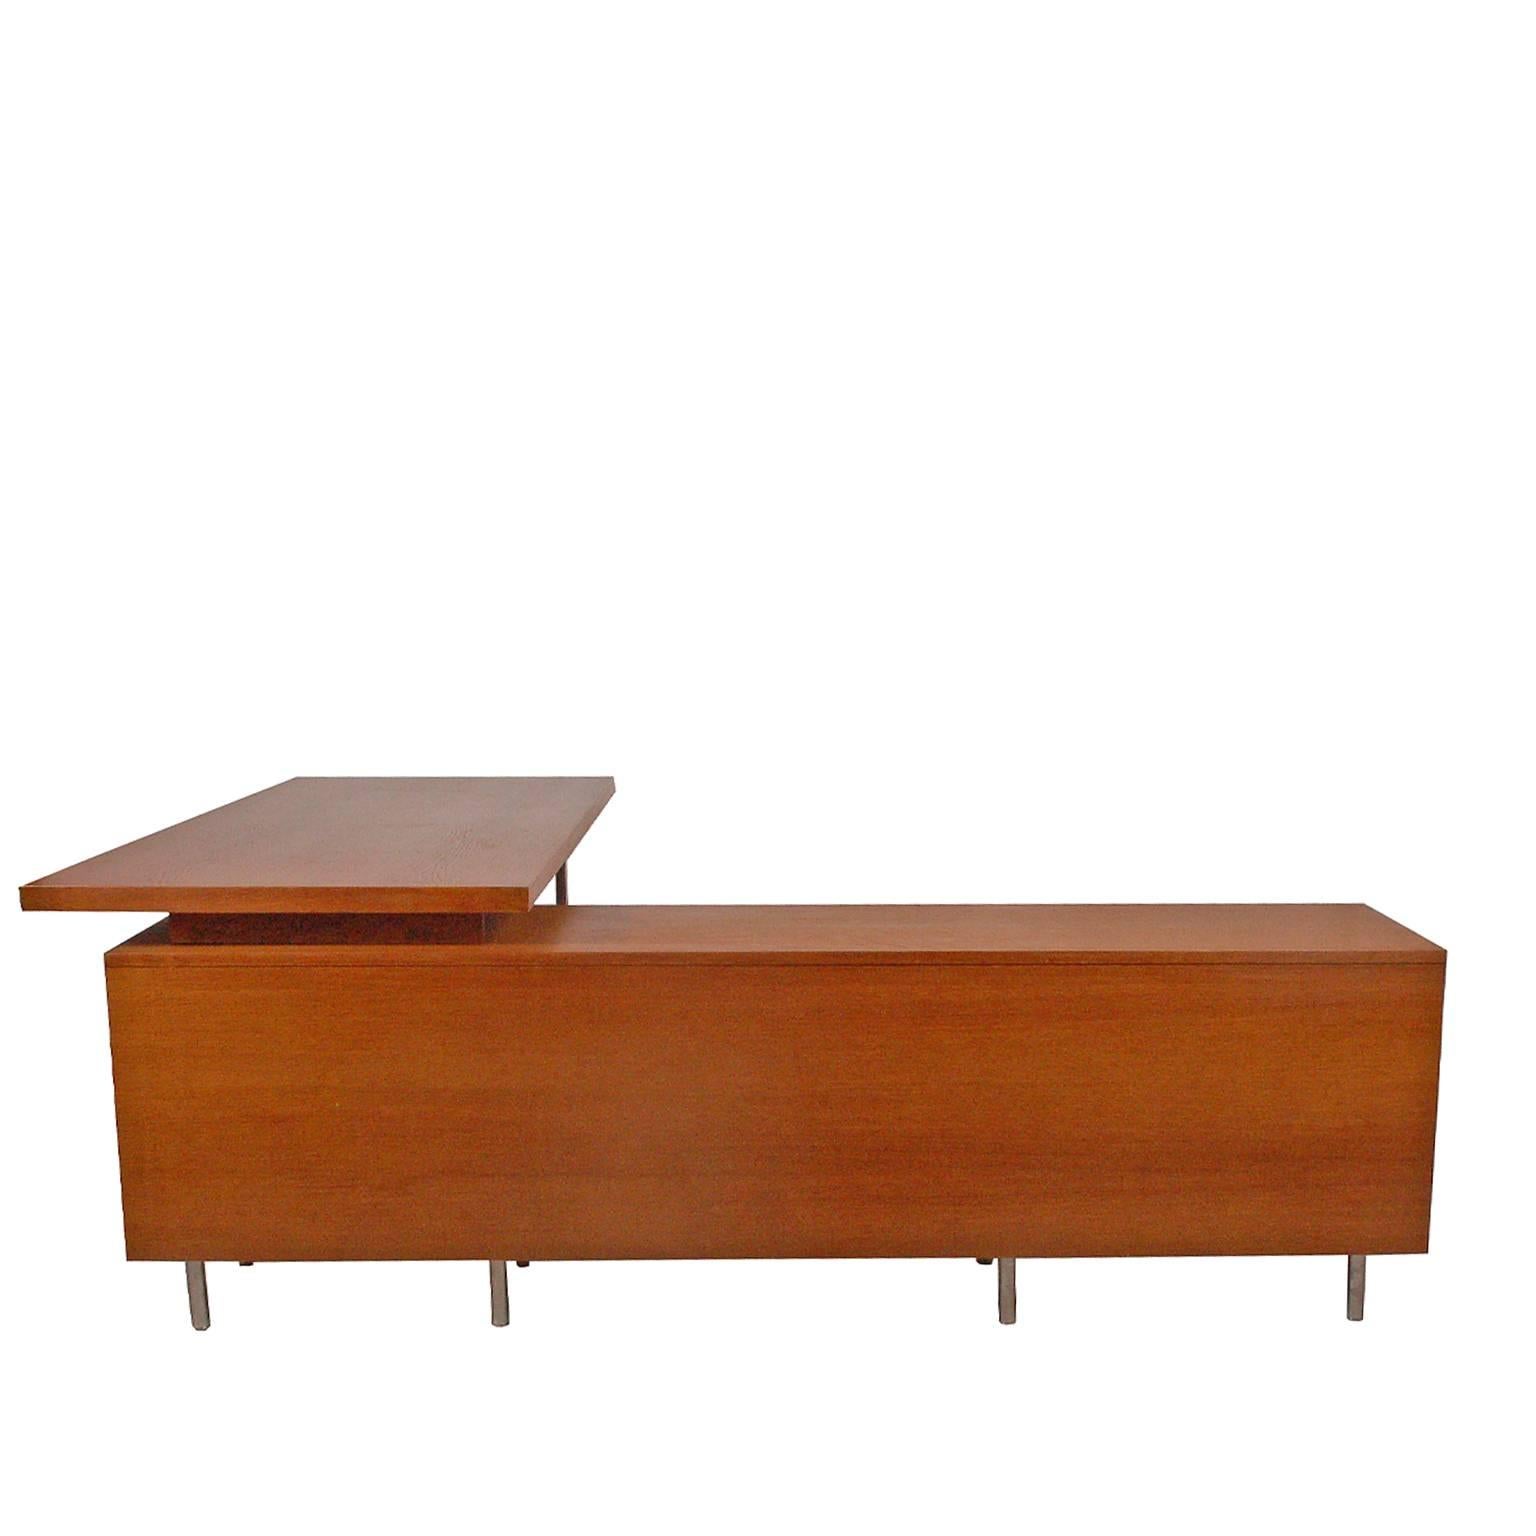 Mid-20th Century Executive Office Group Desk by George Nelson 1952 for Herman Miller